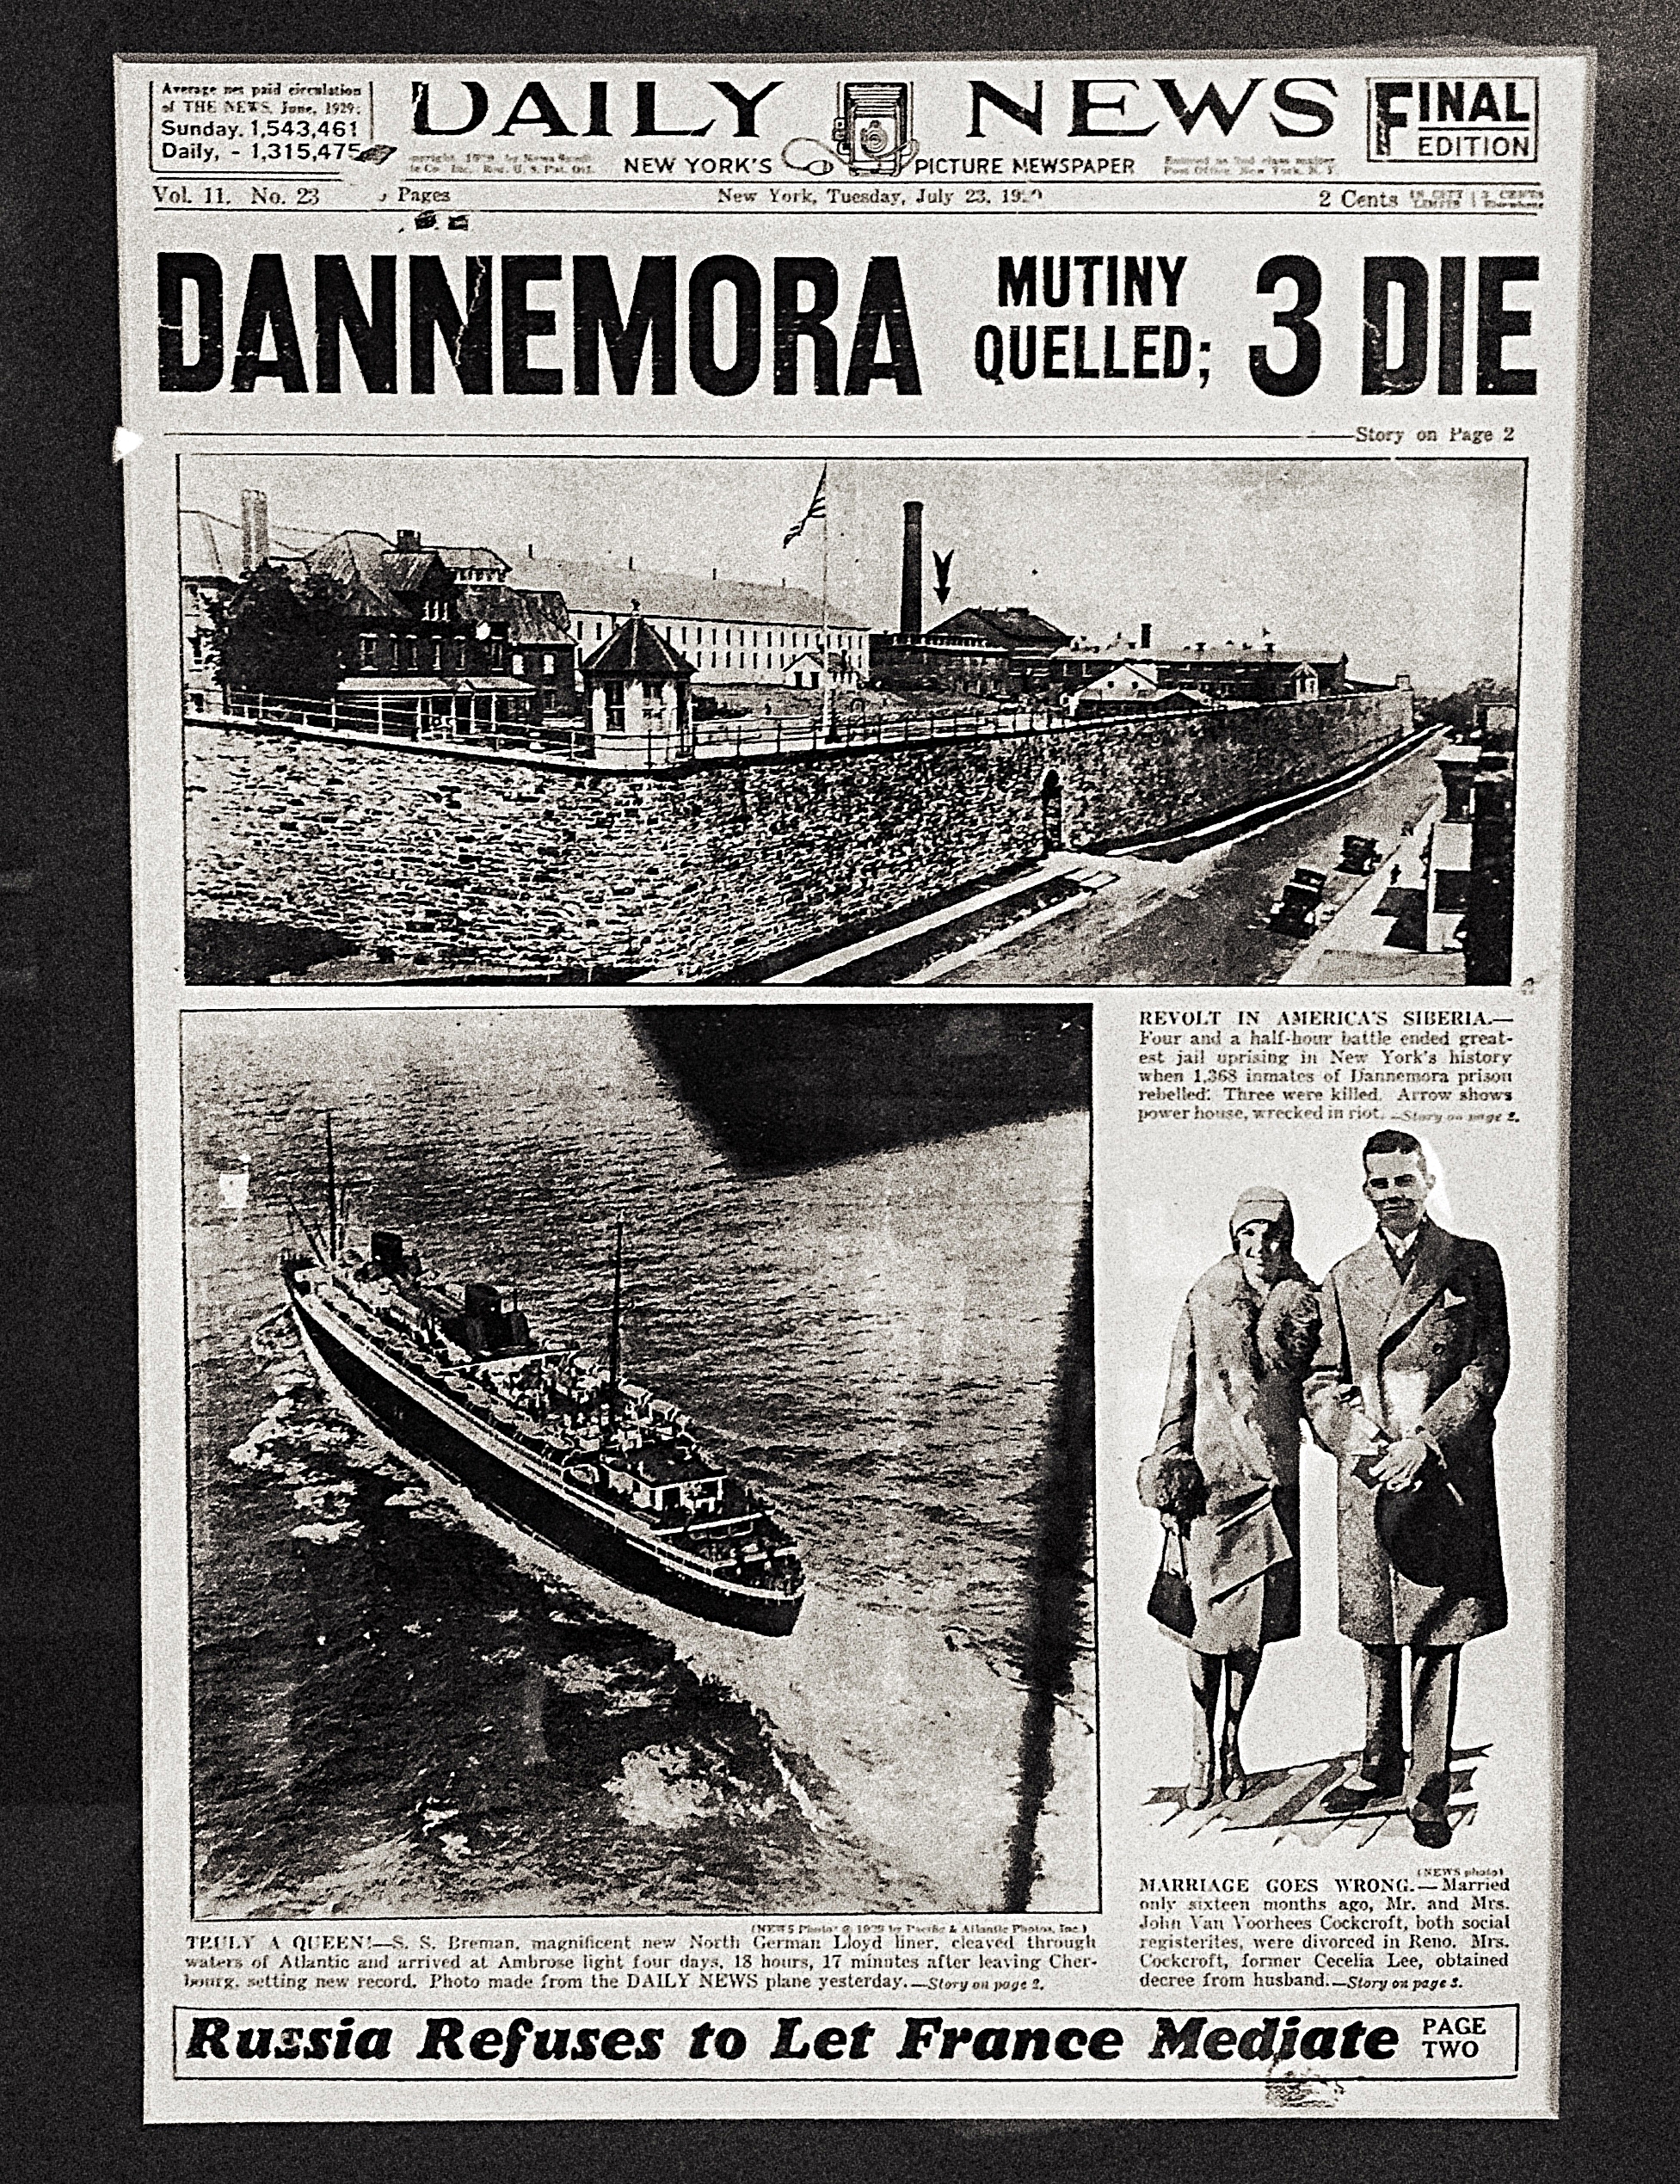  The front page of the New York Daily News July 23, 1929, that reported of a prisoner mutiny in Dannemora. Image courtesy of historian Walter "Pete" Light for the Museum at the Dannemora Free Library.&nbsp; (Chelsia Rose Marcius/June 17, 2015)&nbsp; 